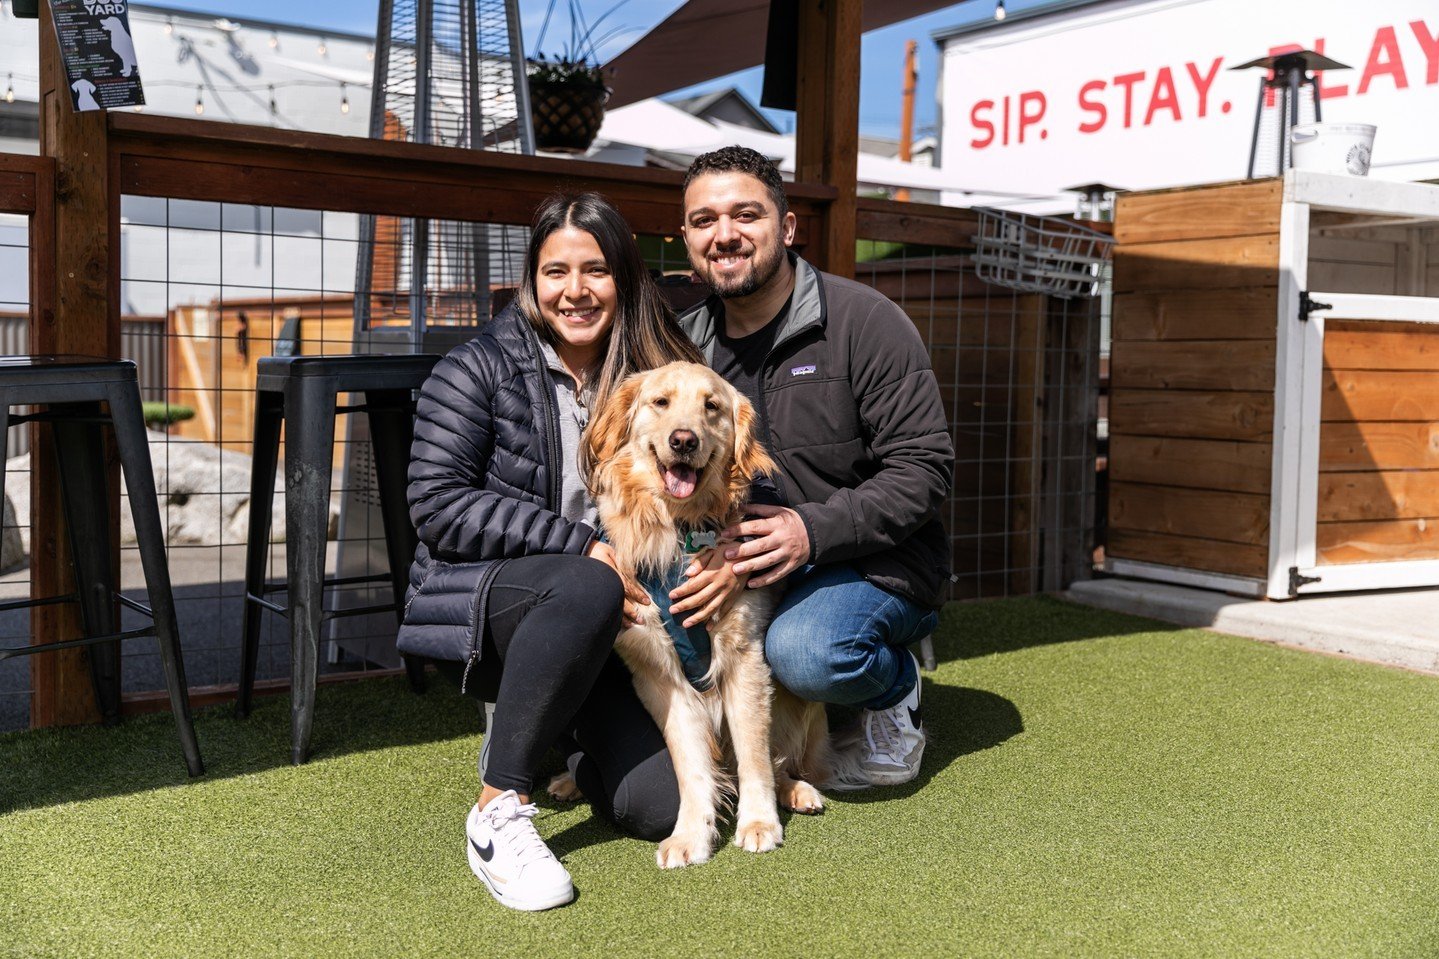 Swipe for a before picture 😍 Griffin and his pawrents were spotted at Dog Yard Bar's golden retriever meetup and our marketing &amp; event coordinator recognized the trio from a golden retriever meetup back in 2022! 

We're so happy that Griffin and